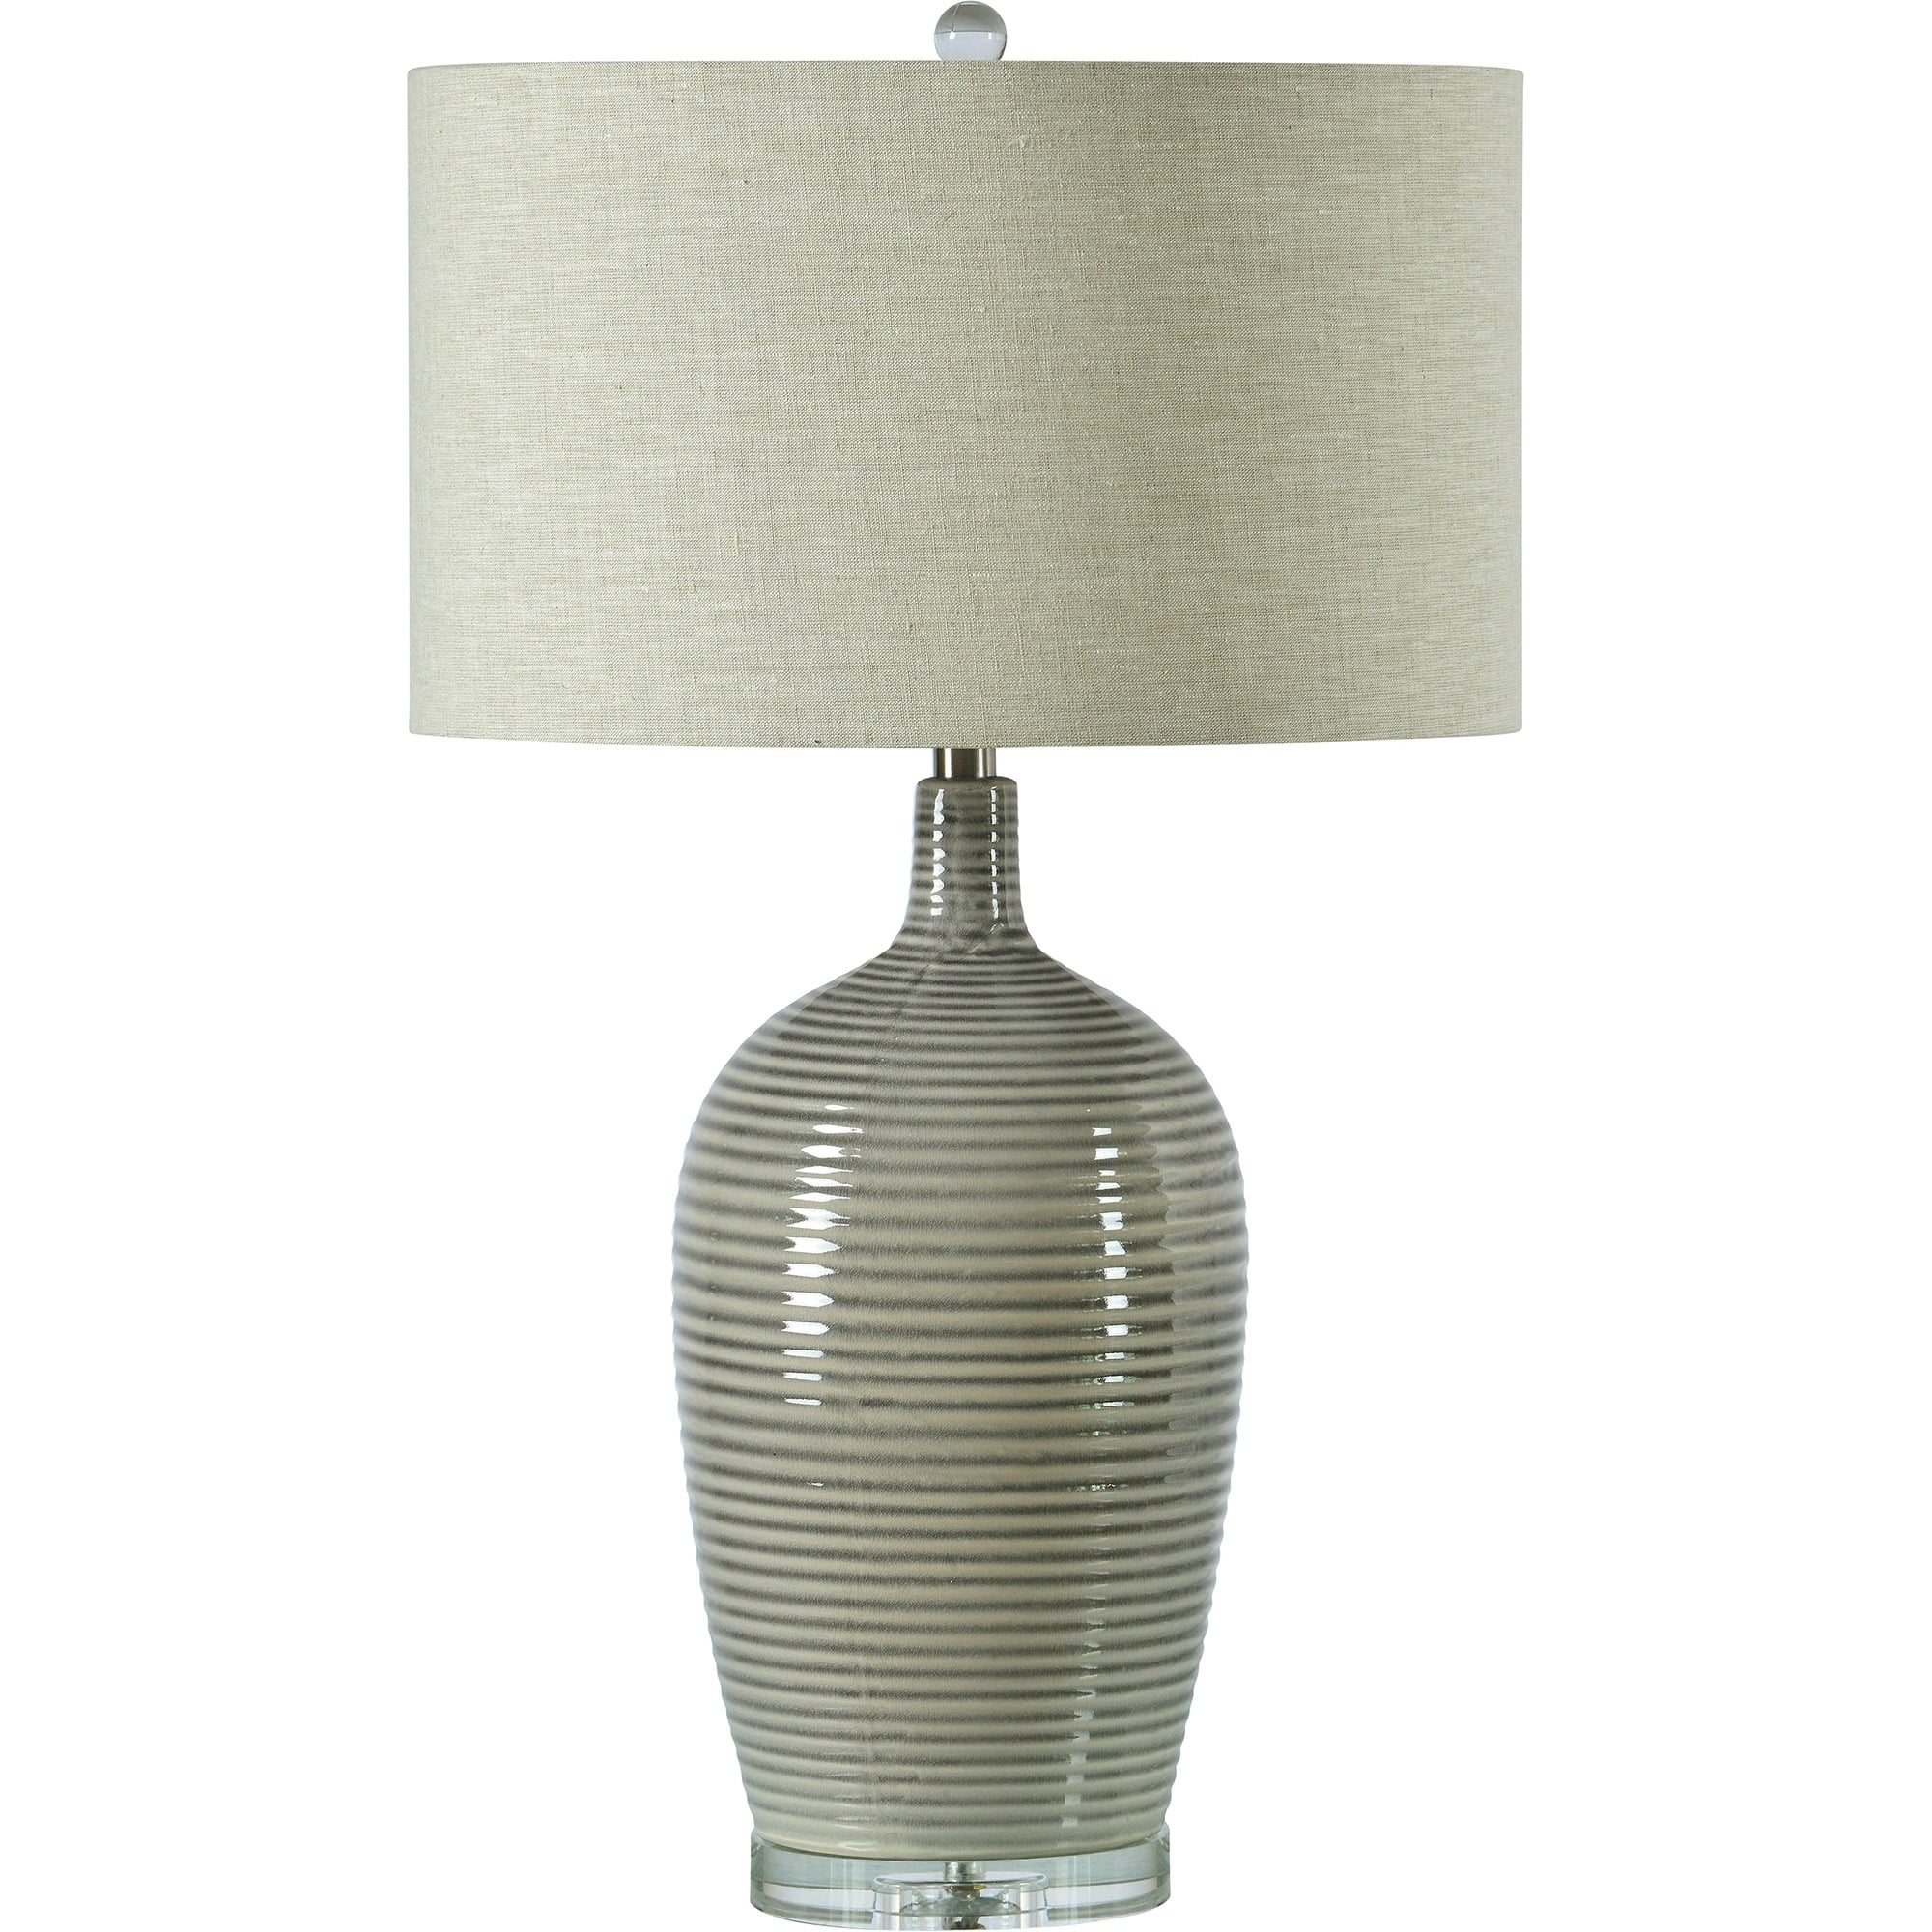 White Ceramic And Crystal Table Lamp, Powell Led Table Lamp